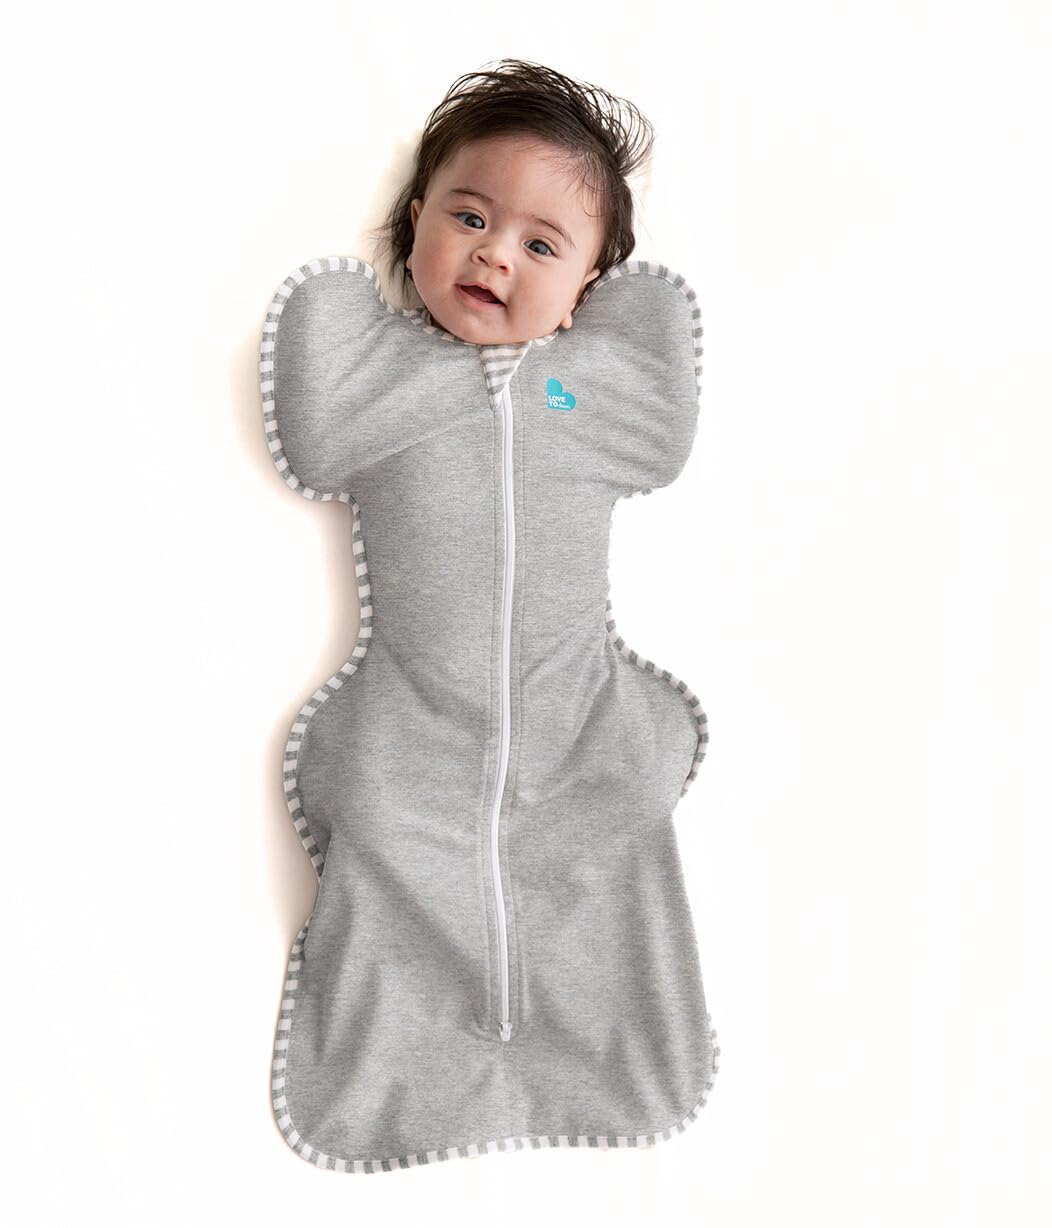 Love to Dream Swaddle UP, Baby Sleep Sack, Self-Soothing Swaddles for Newborns, Improves Sleep, Snug Fit Helps Calm Startle Reflex, New Born Essentials for Baby, 13-19 lbs, Grey